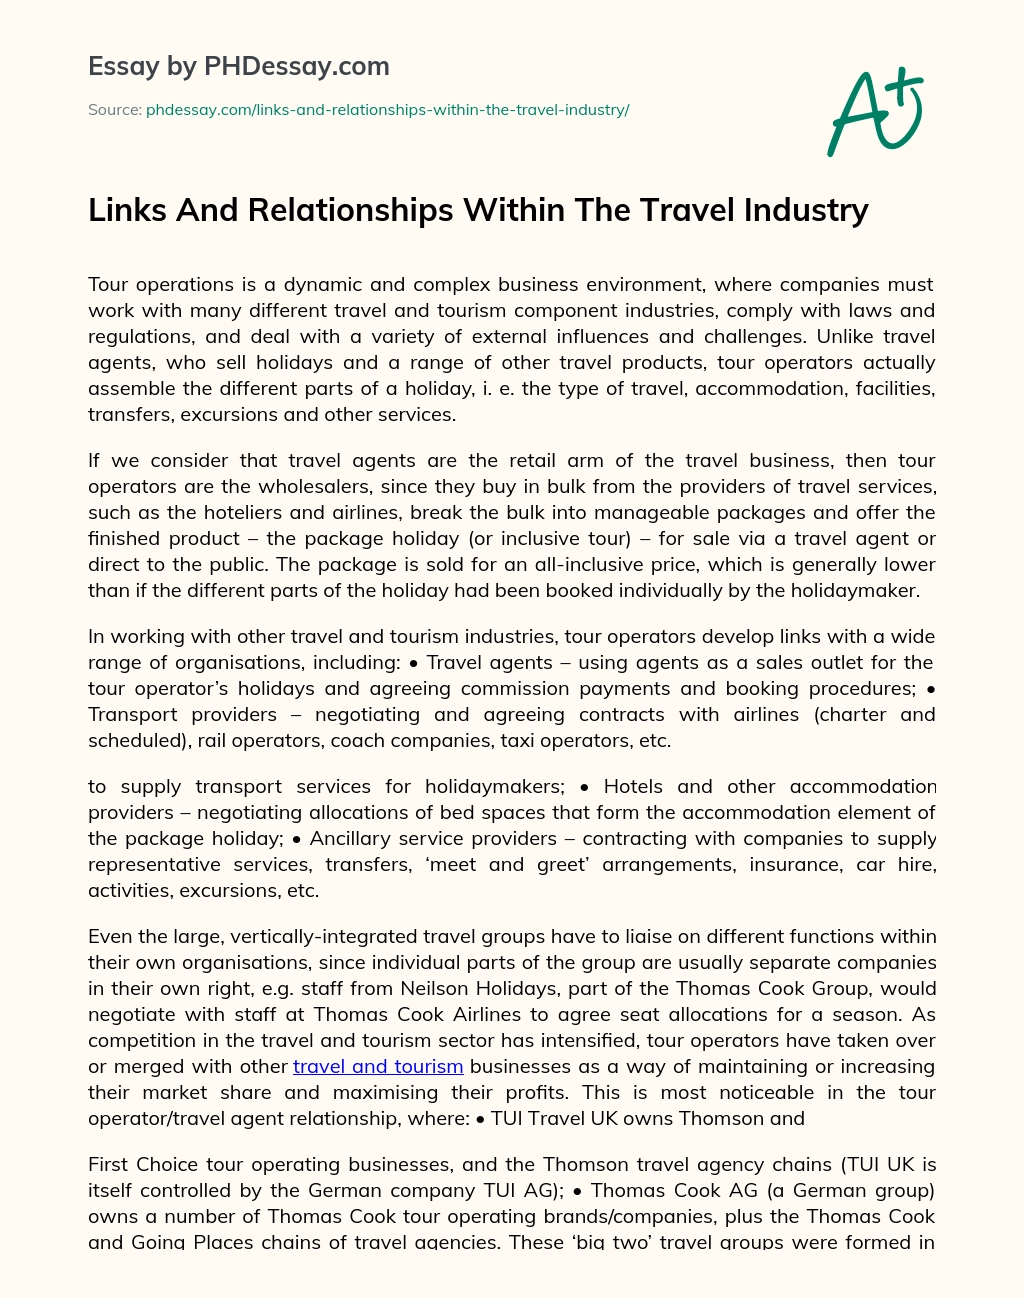 Links And Relationships Within The Travel Industry essay